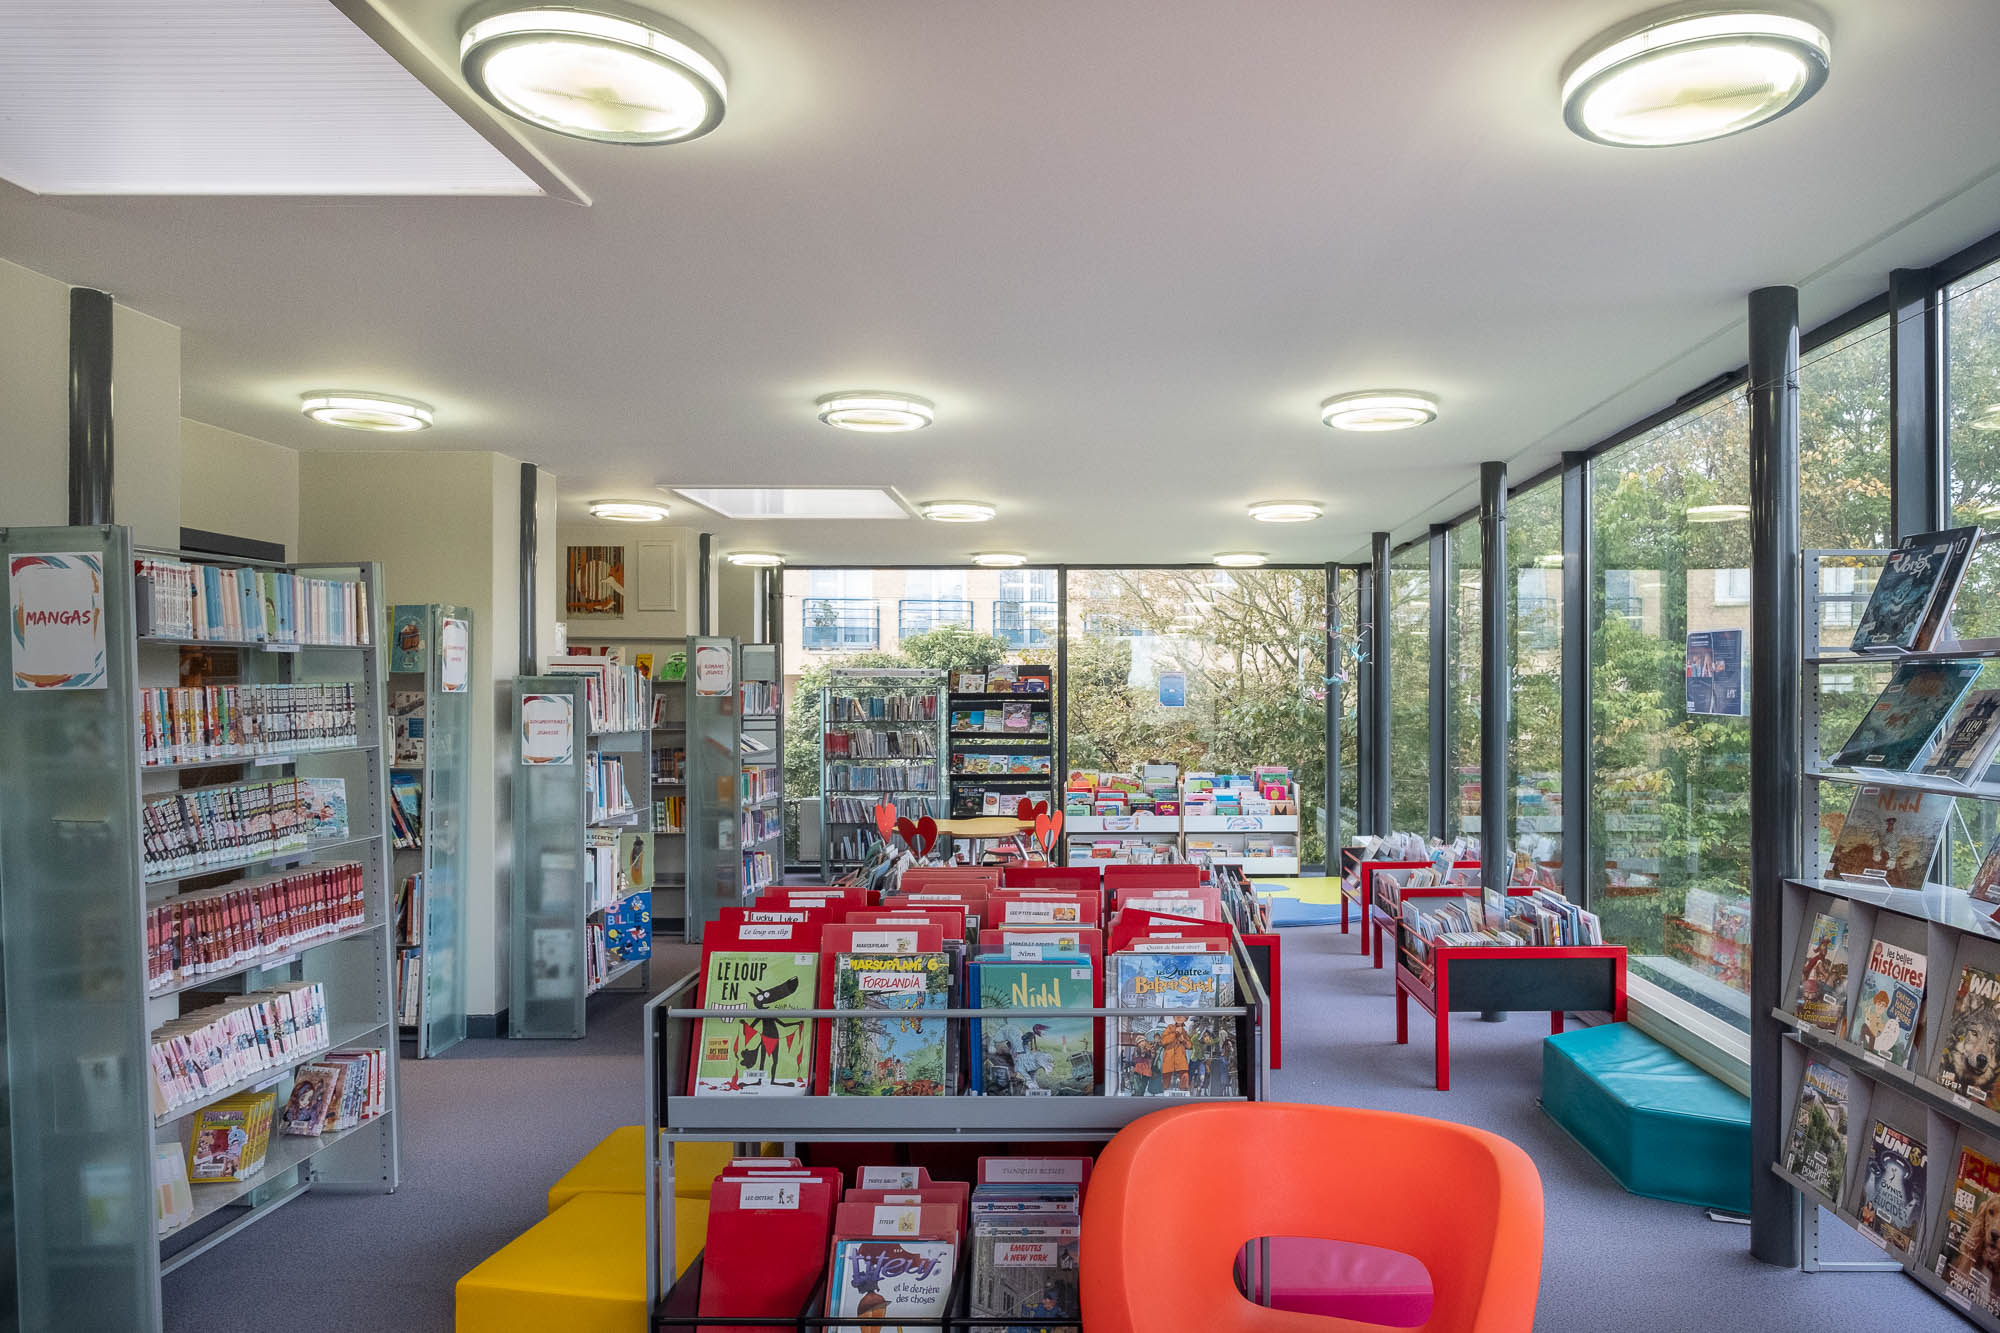 Interior view of a modern library. It is a rectangular, glass-fronted room with colourful bookshelves.